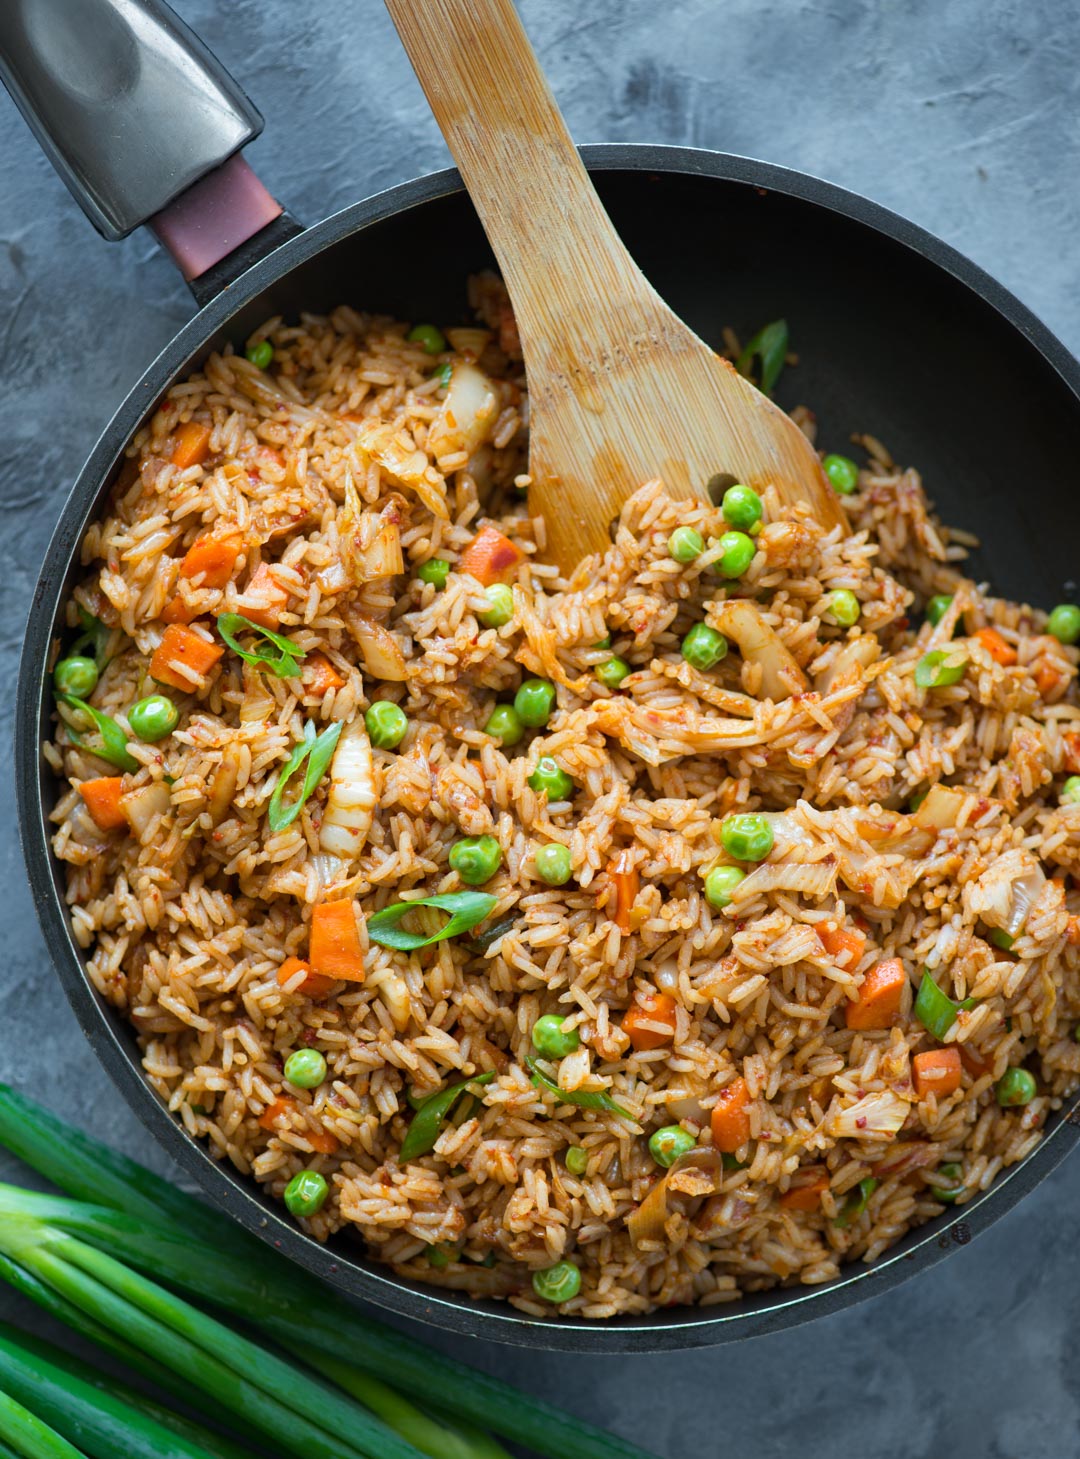 Quick and easy Kimchi Fried rice with tons of flavour from Kimchi, Garlic, ginger and gochujang. Throw in some peas, carrots and top it with sunny side up for a delicious meal.